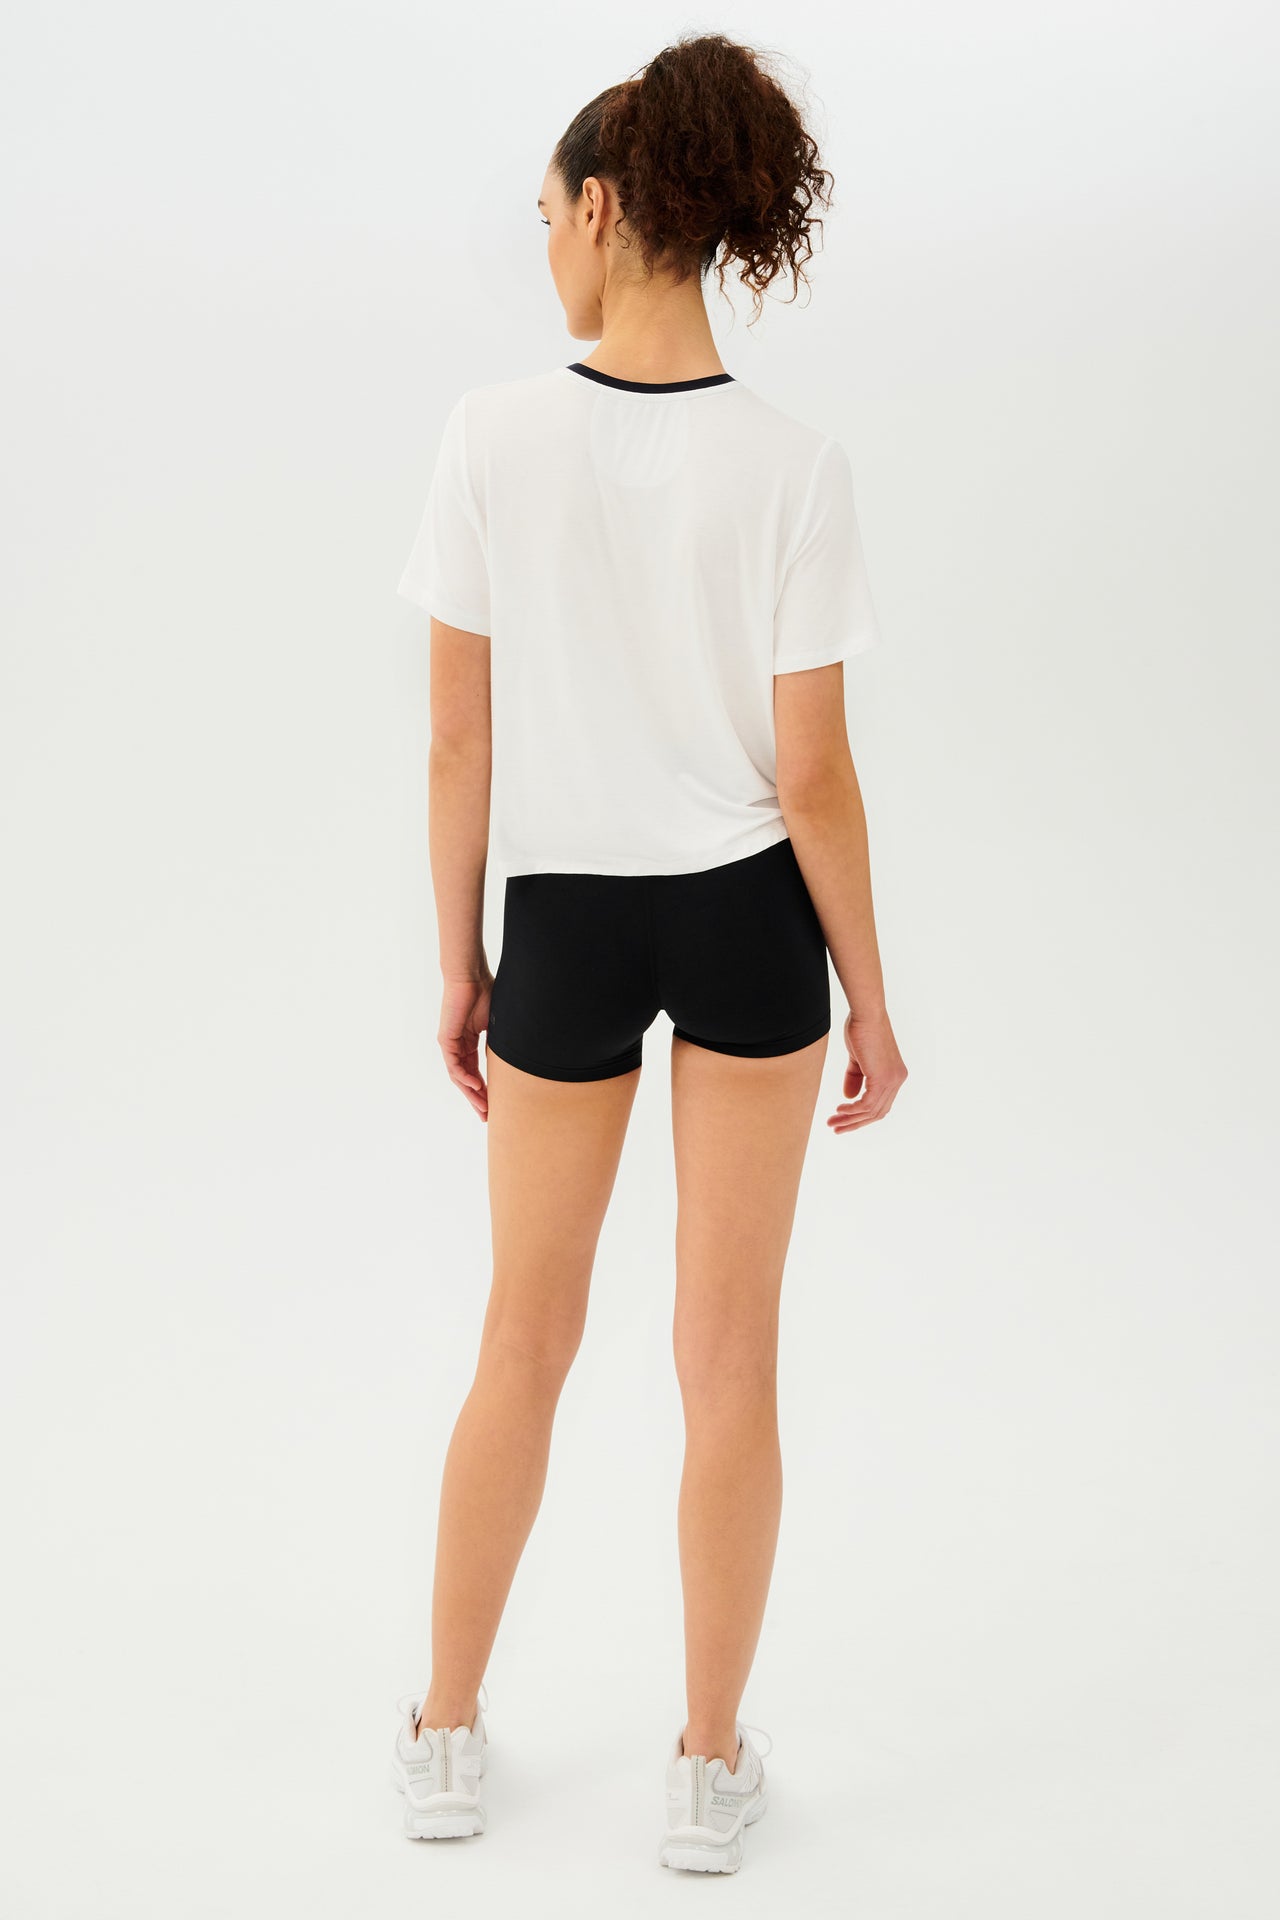 Full back view of girl wearing white cropped short sleeve t-shirt with thin black neck hem and black bike shorts with white shoes